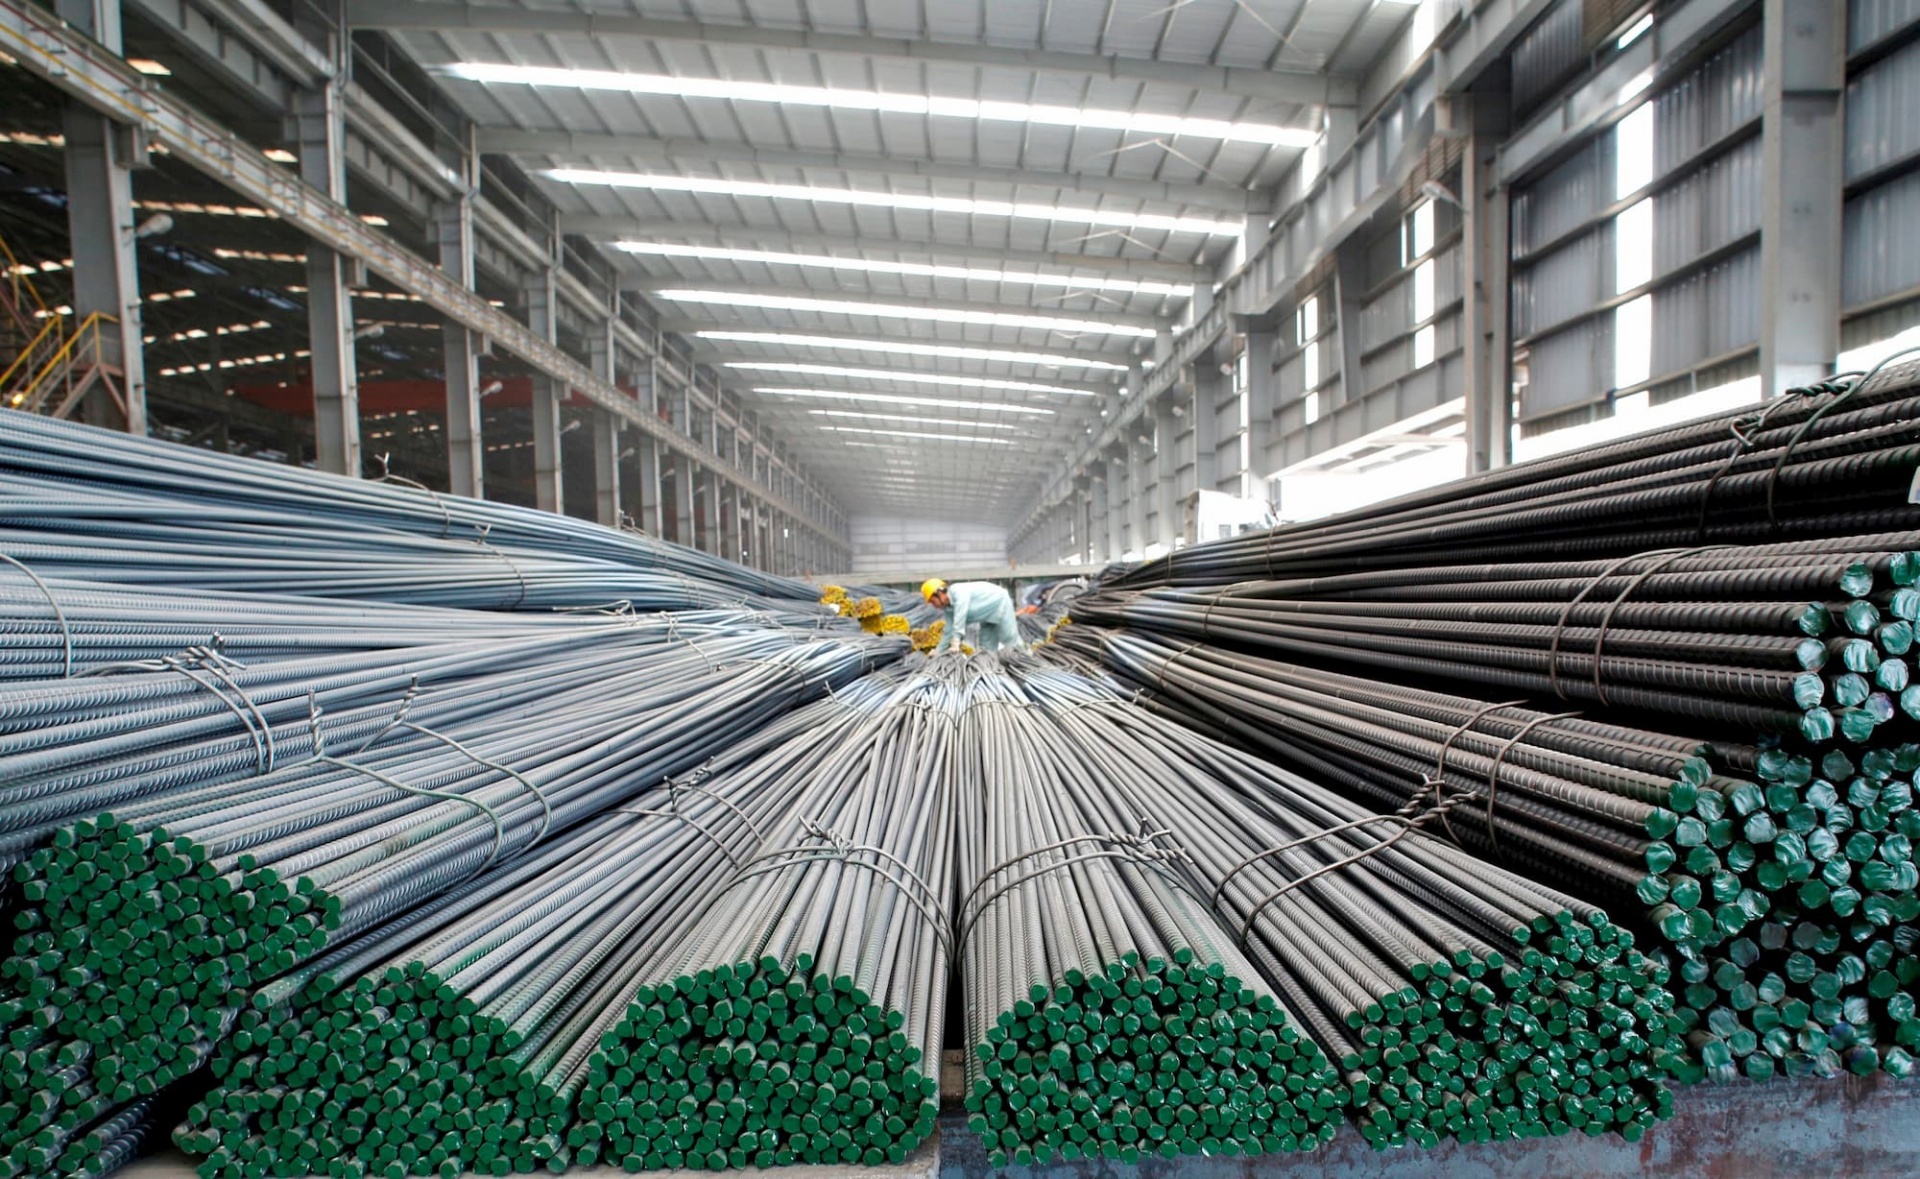 Construction steel price soars threefold in one month